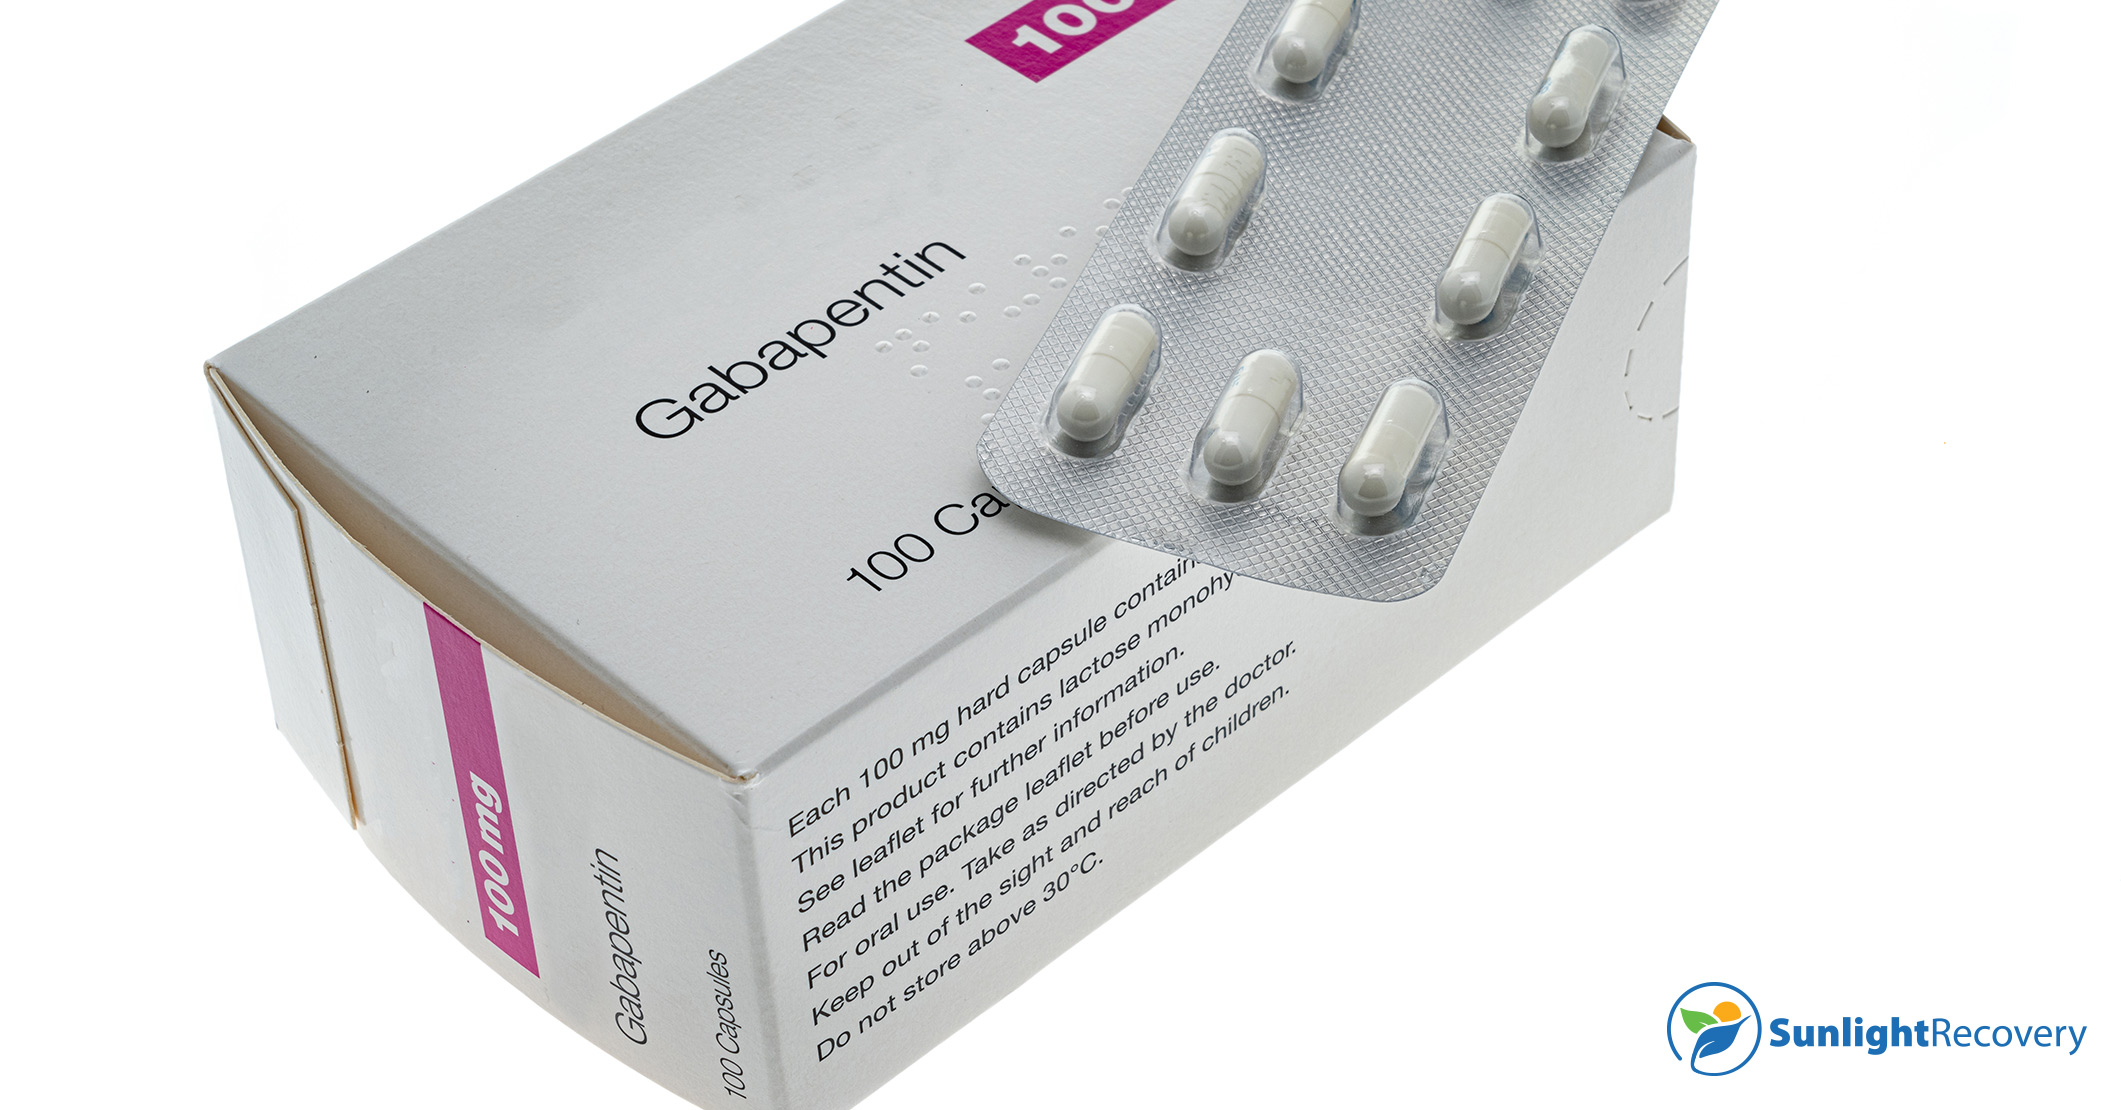 Does Gabapentin Cause Weight Gain?